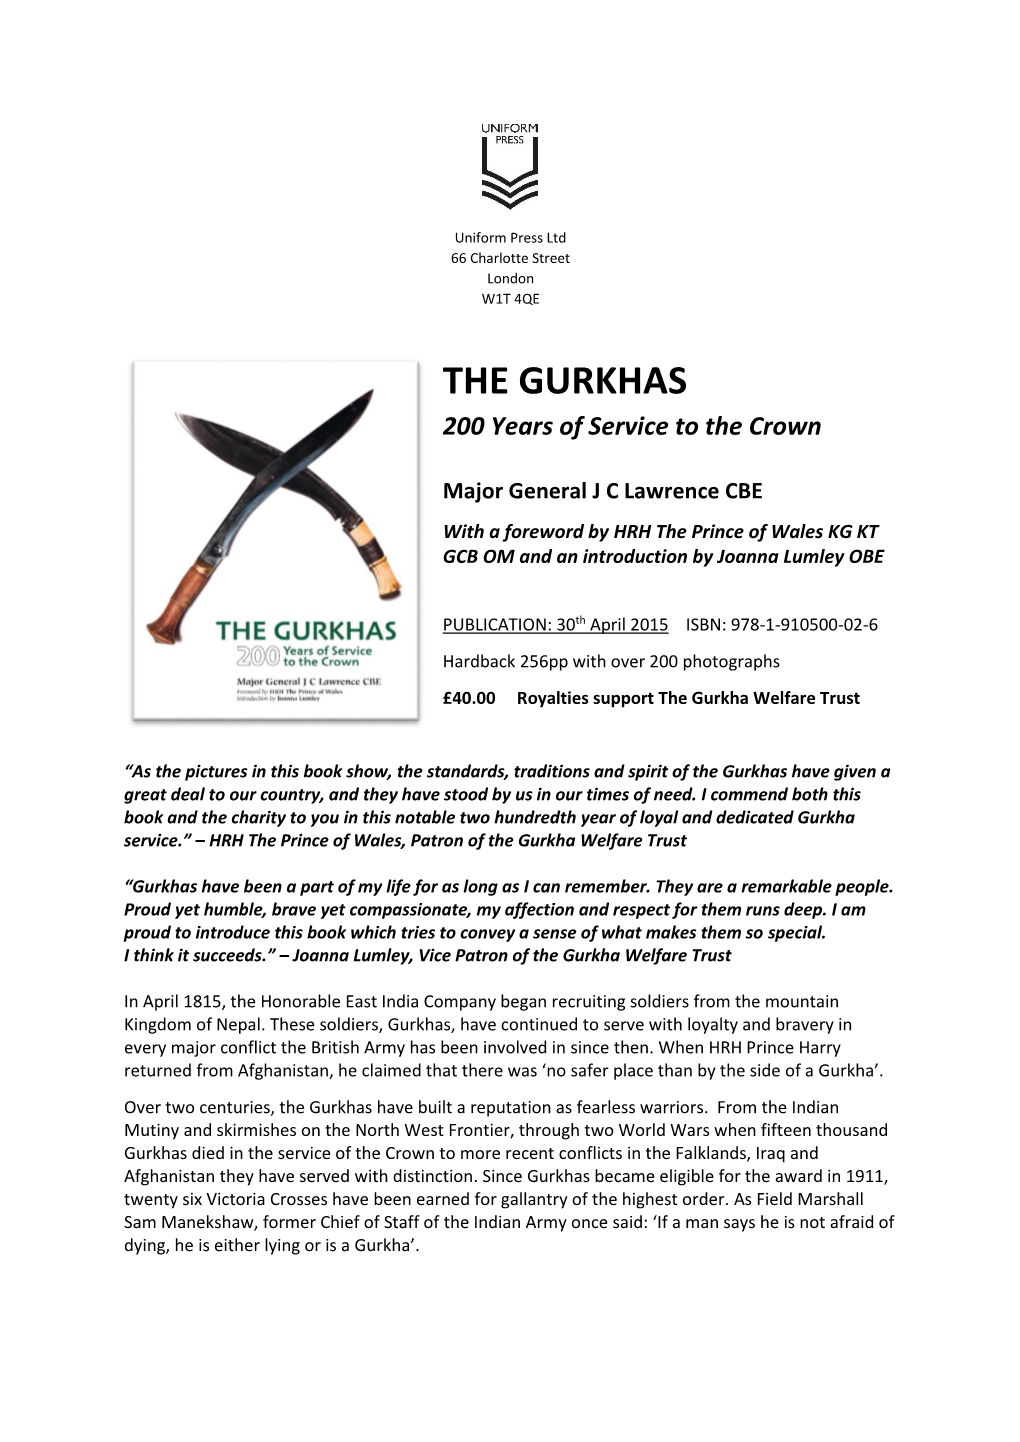 THE GURKHAS 200 Years of Service to the Crown